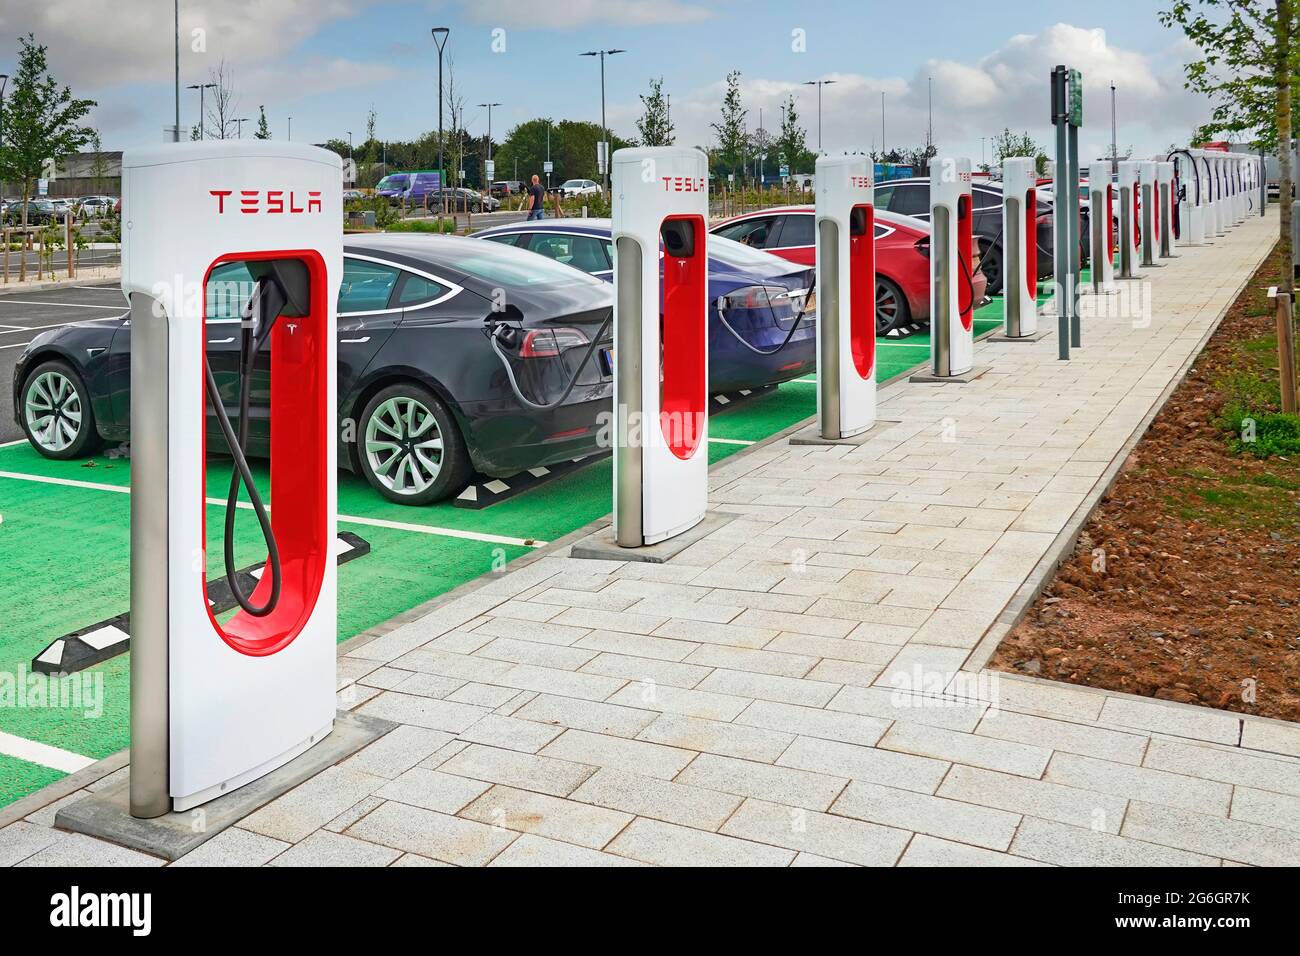 Impact of climate change concerns brings new infrastructure installation electric car charging points & row of connected cars & cables Rugby Moto UK Stock Photo